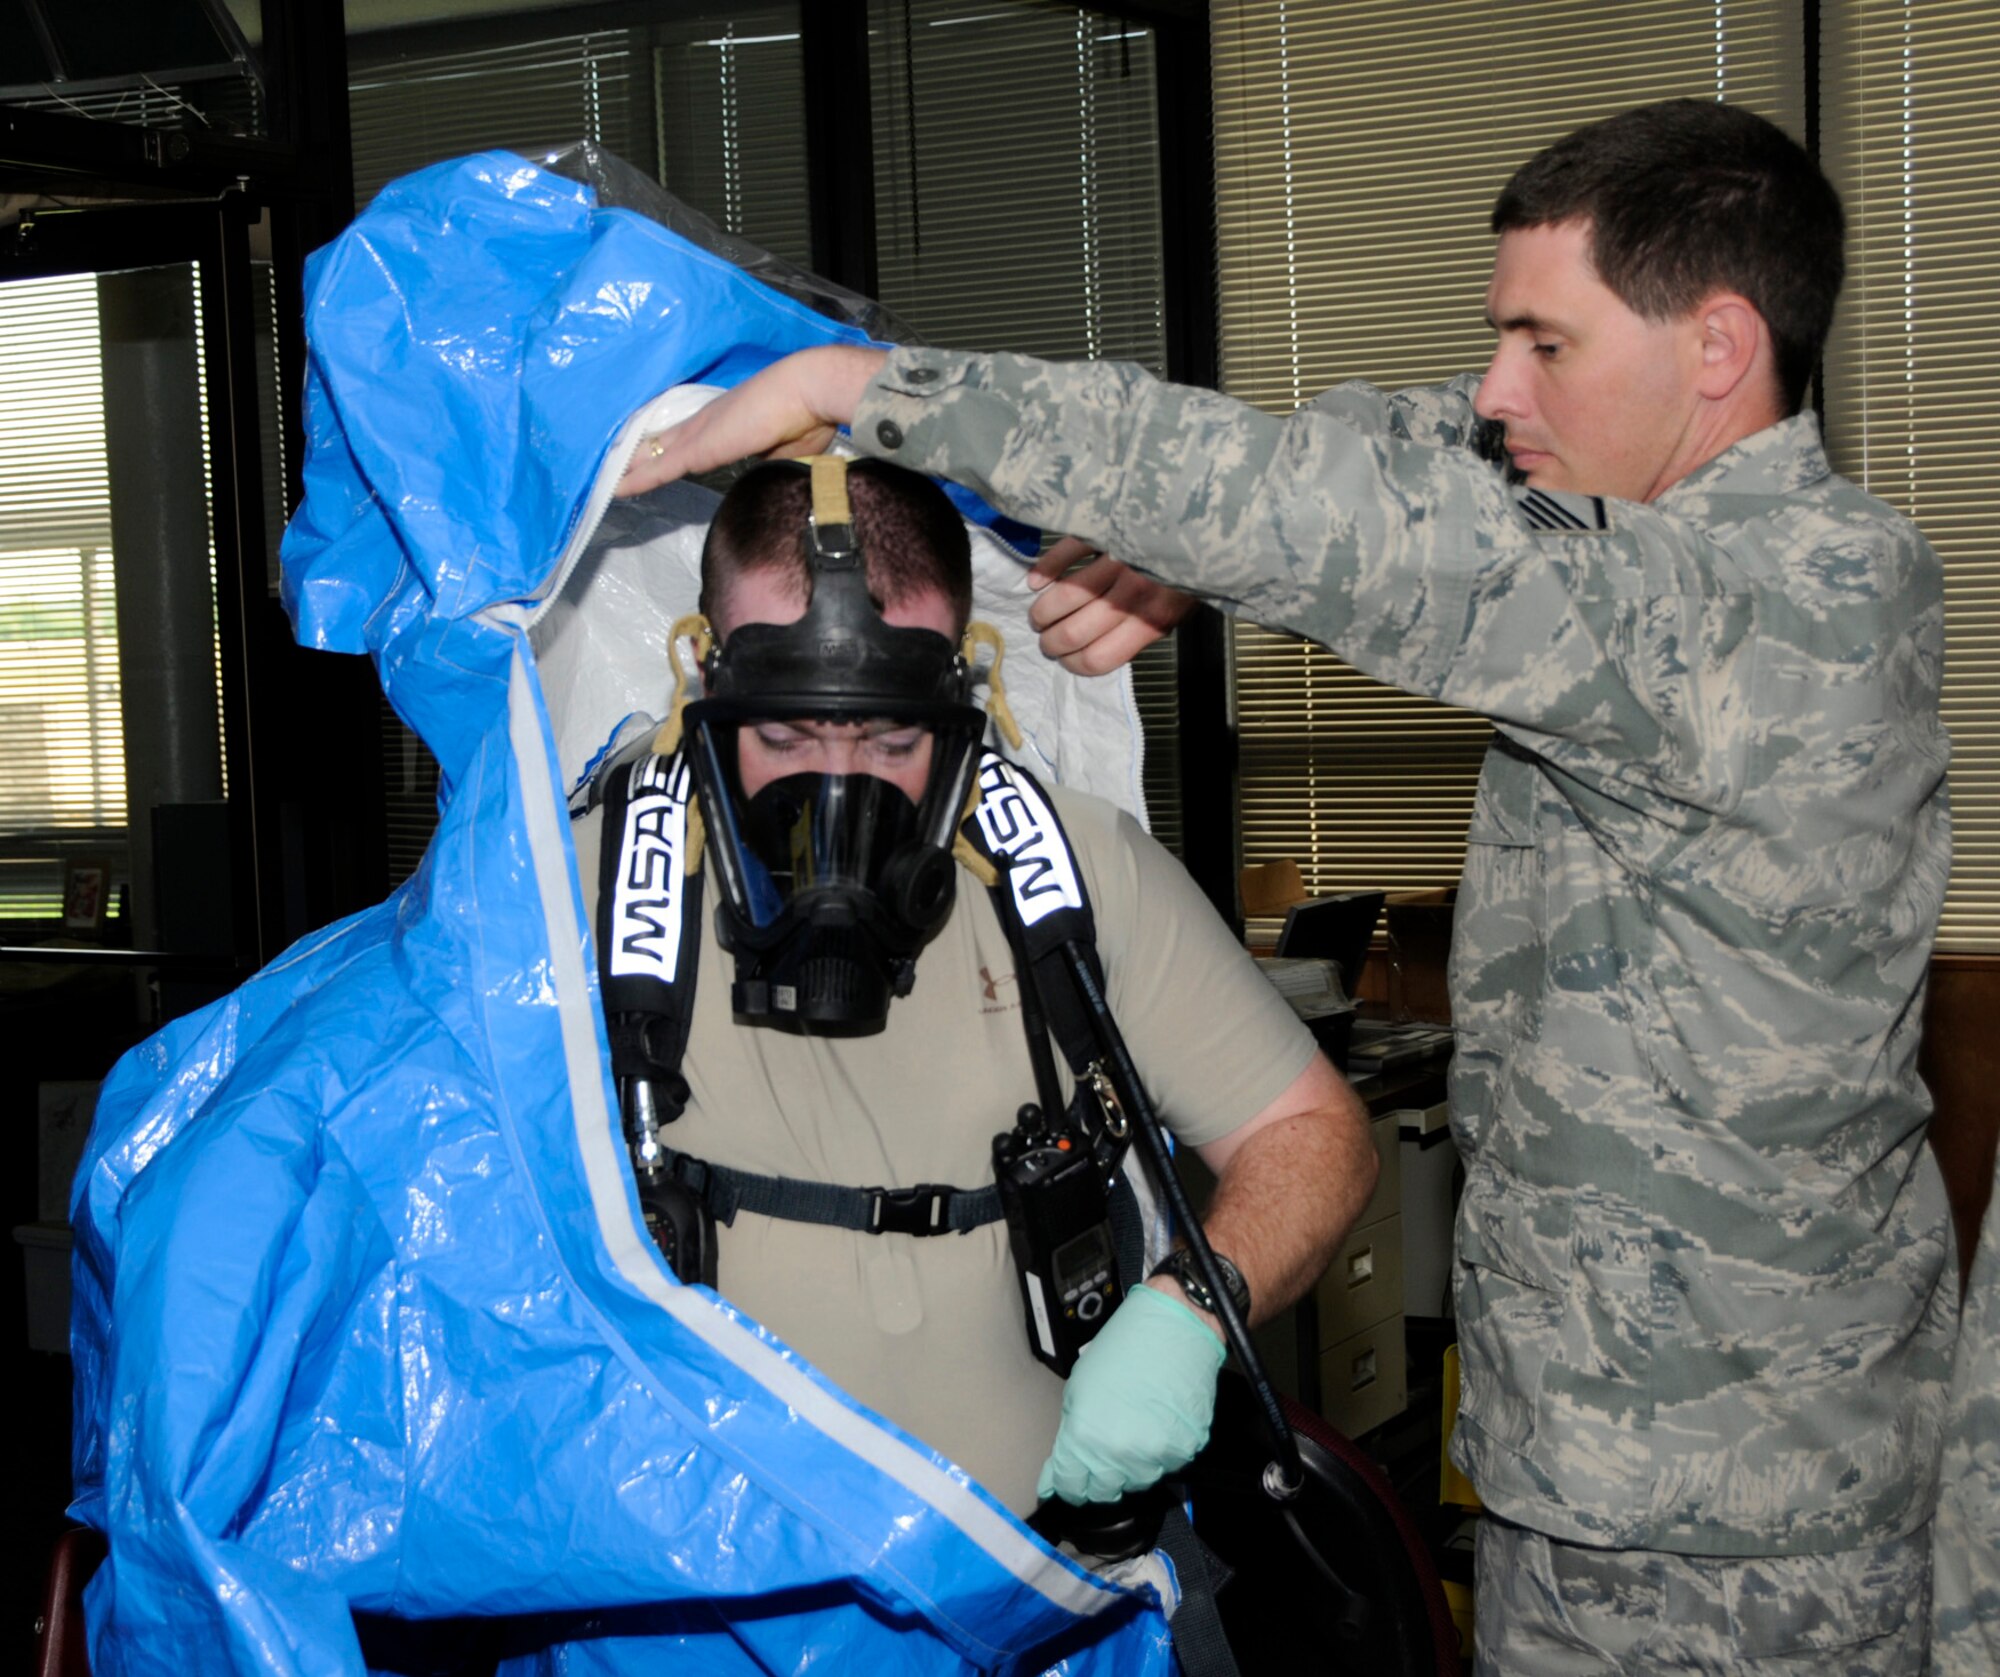 Tech Sgt. Timothy Booth of the 188th Fighter Wing, left, prepares for an exercise scenario at the 188th April 28. Booth is a member of the Air National Chemical, Biological, Radiological and Nuclear (CBRNE) Challenge Team, which trained at the 188th April 26-30  in preparation for this week’s Air Force-wide CBRNE competition held at the Center of National Response in West Virginia. (U.S. Air Force photo by Senior Master Sgt. Dennis Brambl/188th Fighter Wing Public Affairs) 